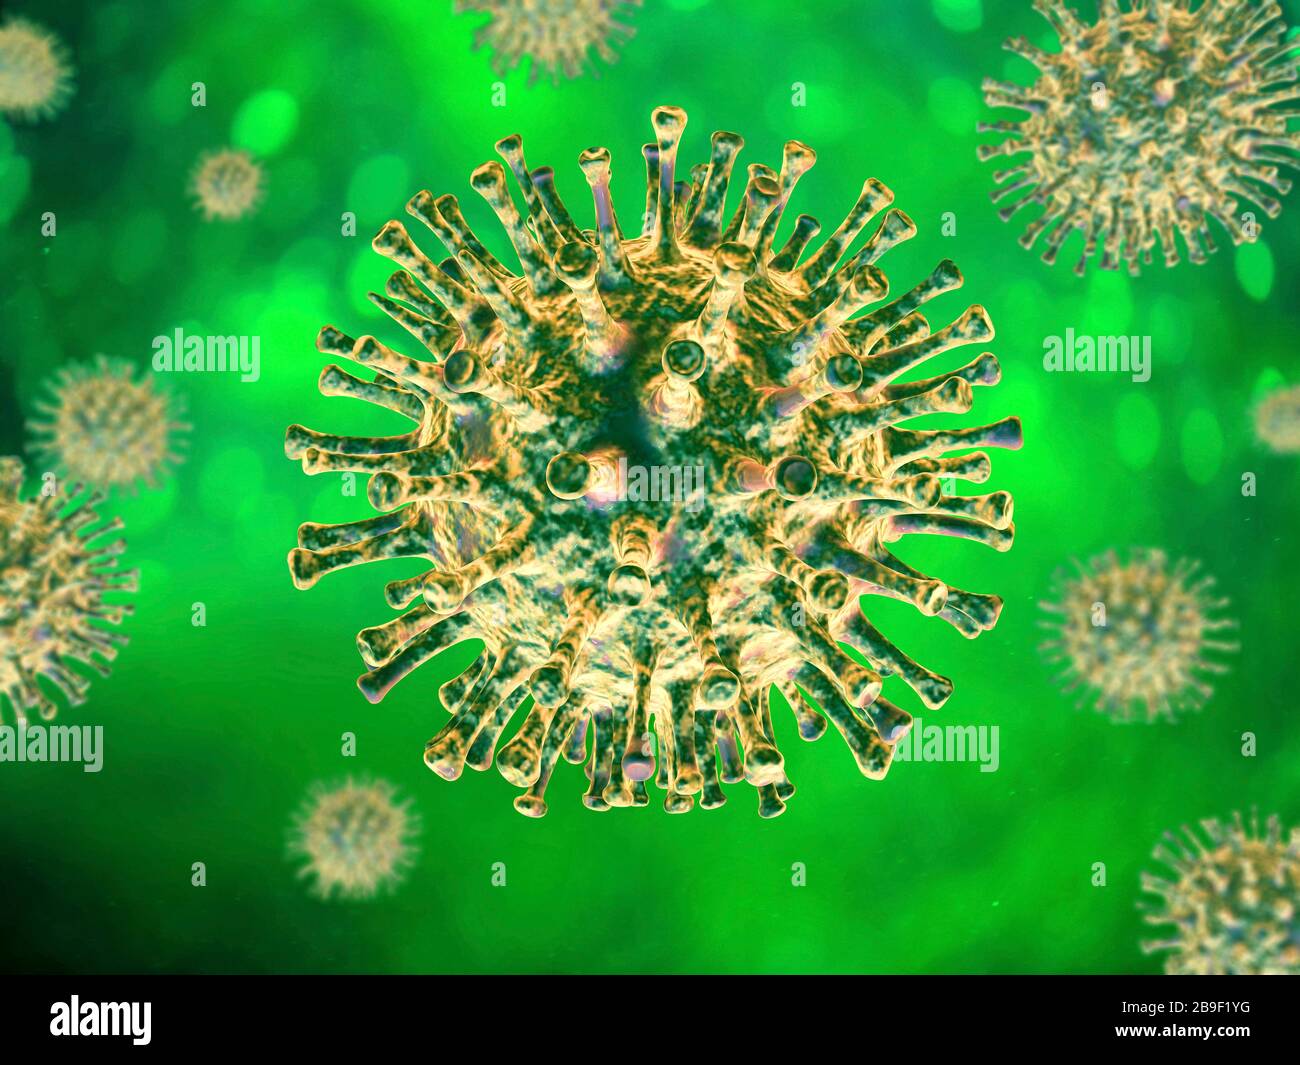 3D illustration of a colored coronavirus on a green background. Stock Photo